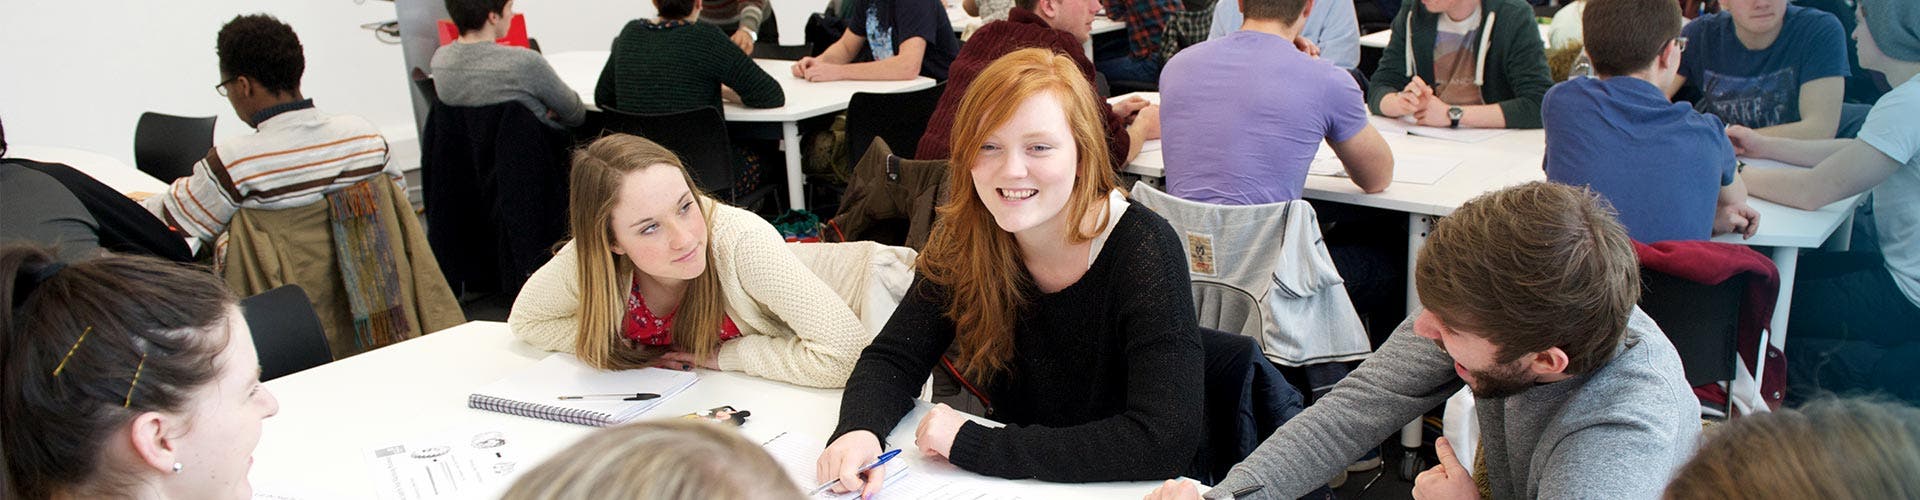 University of Strathclyde students in class